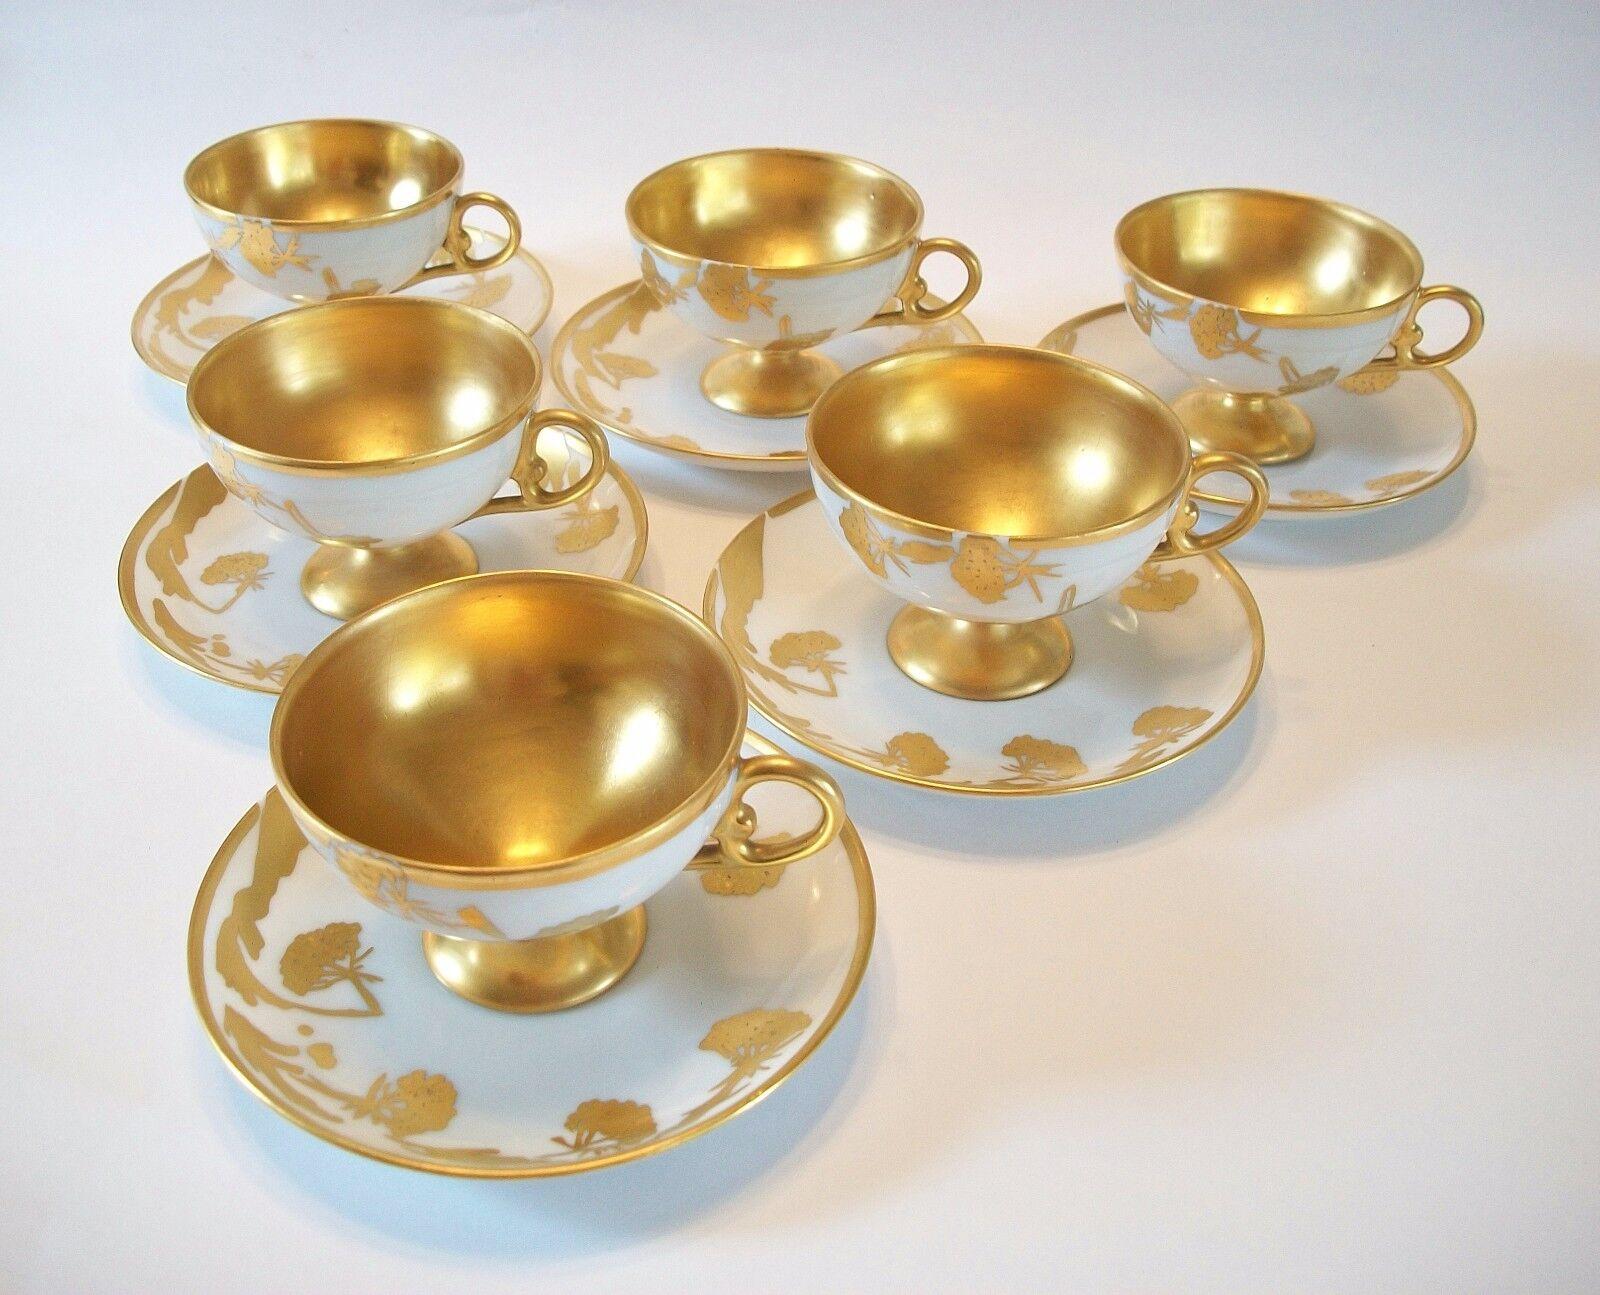 Finest quality hand painted gilt porcelain set of six cups and saucers - each piece with a stylized floral design and a gold wash to the interior of each cup along with gold rims - most pieces hand signed with 'J K' (likely the artist/decorator -